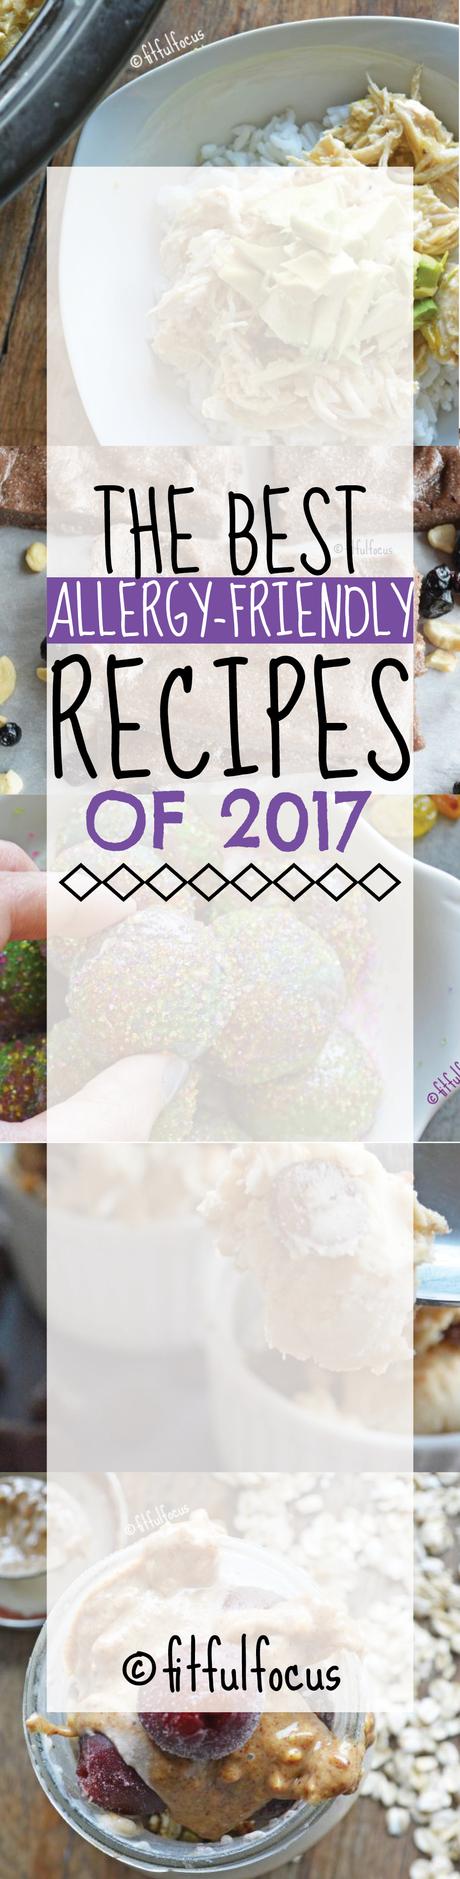 The Best Allergy-Friendly Recipes of 2017